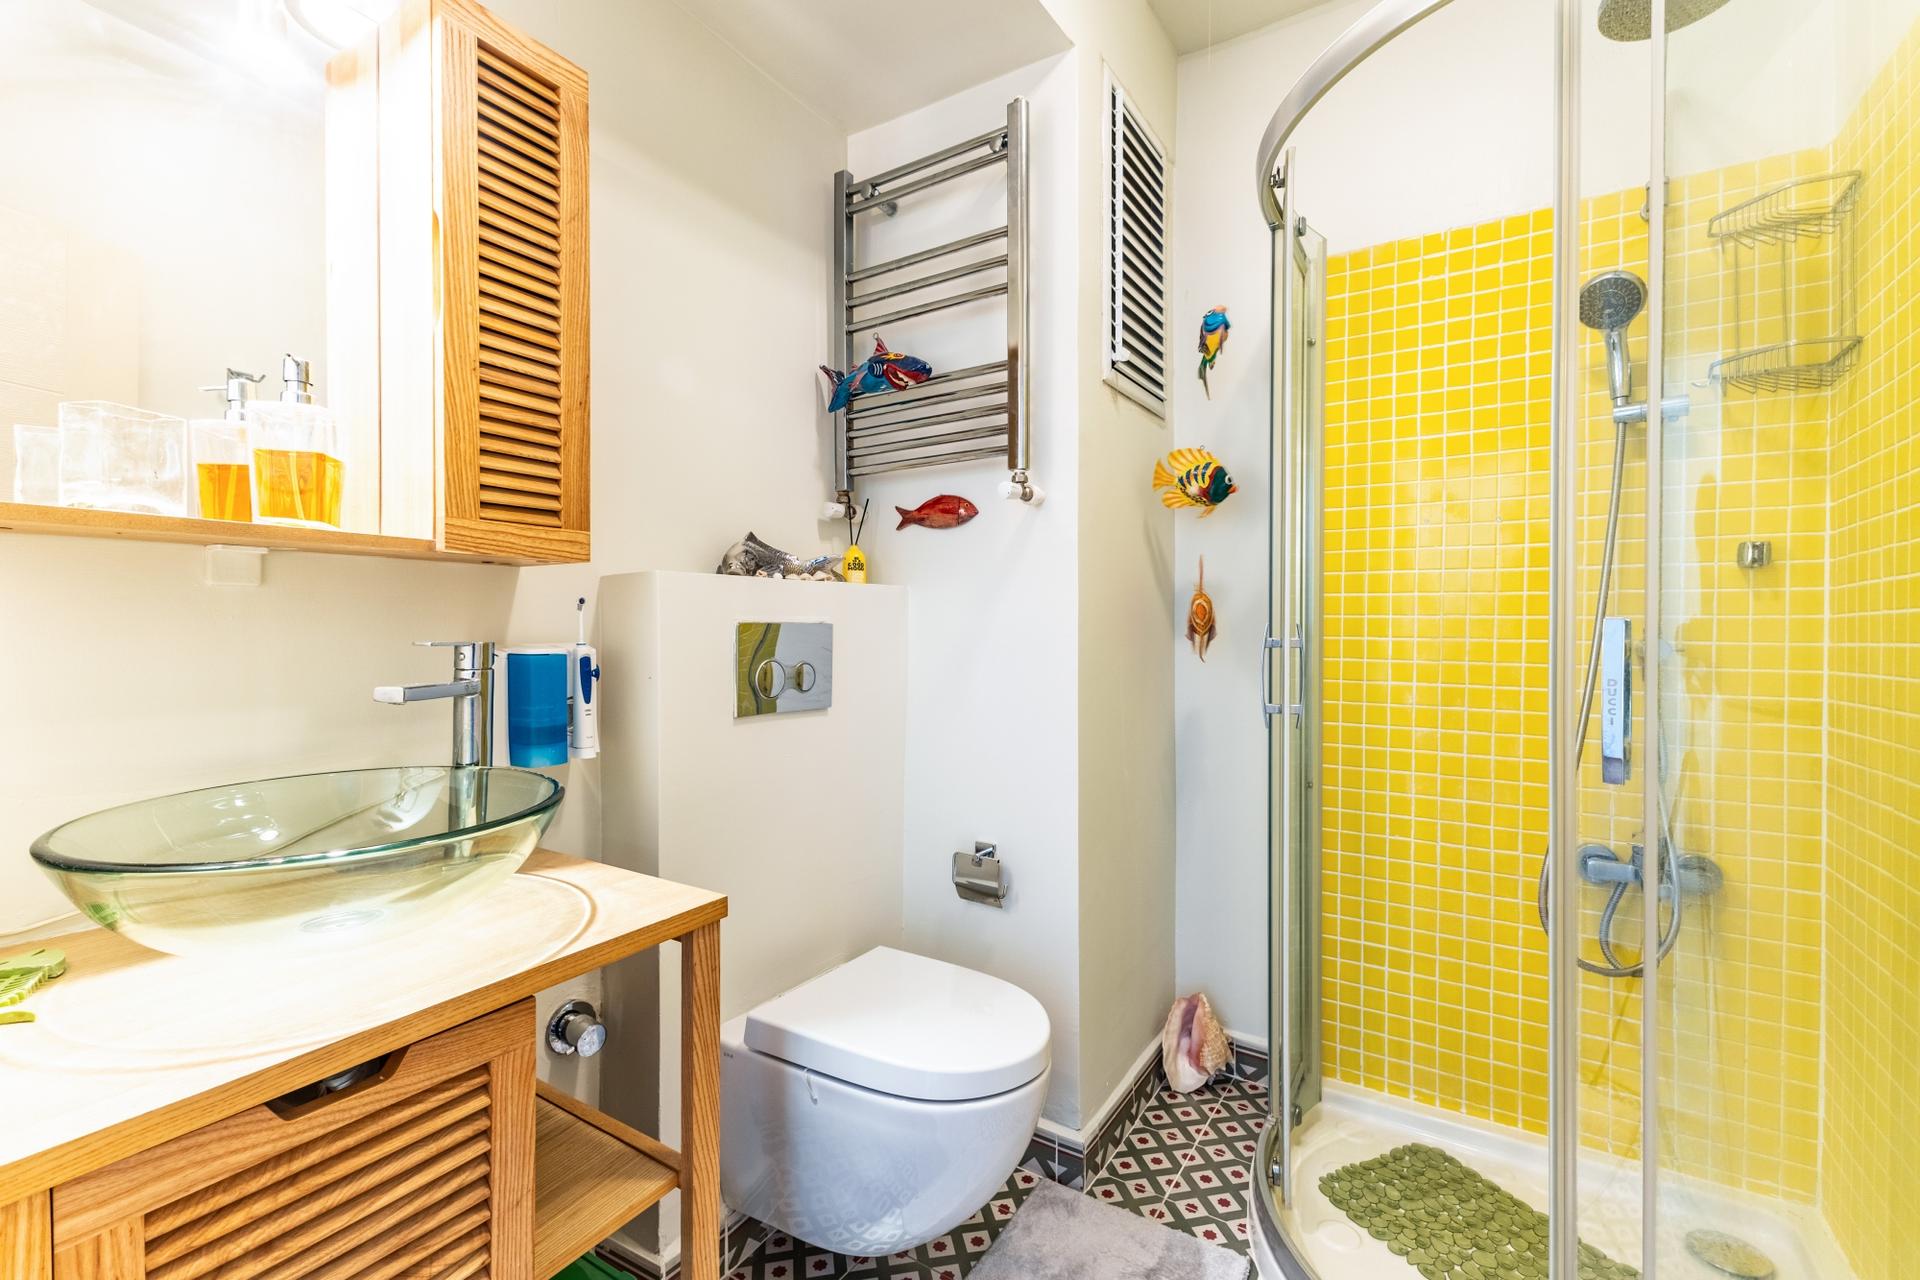 Next up is the house's colorful and lively bathroom.